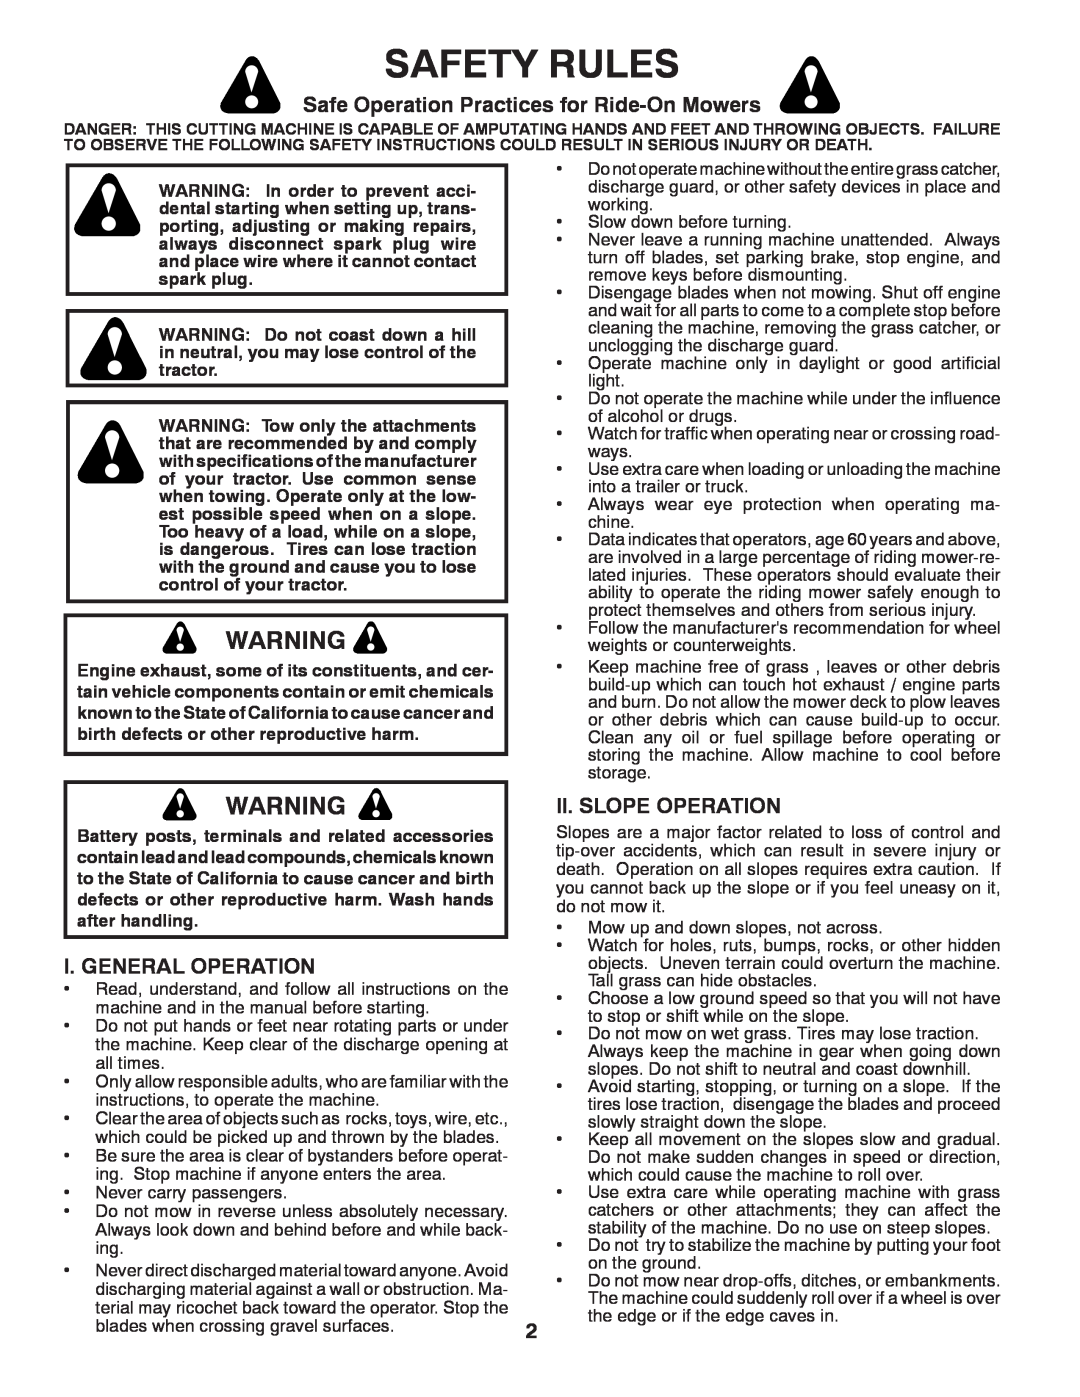 Poulan 96012006802 Safety Rules, Safe Operation Practices for Ride-OnMowers, I. General Operation, Ii. Slope Operation 